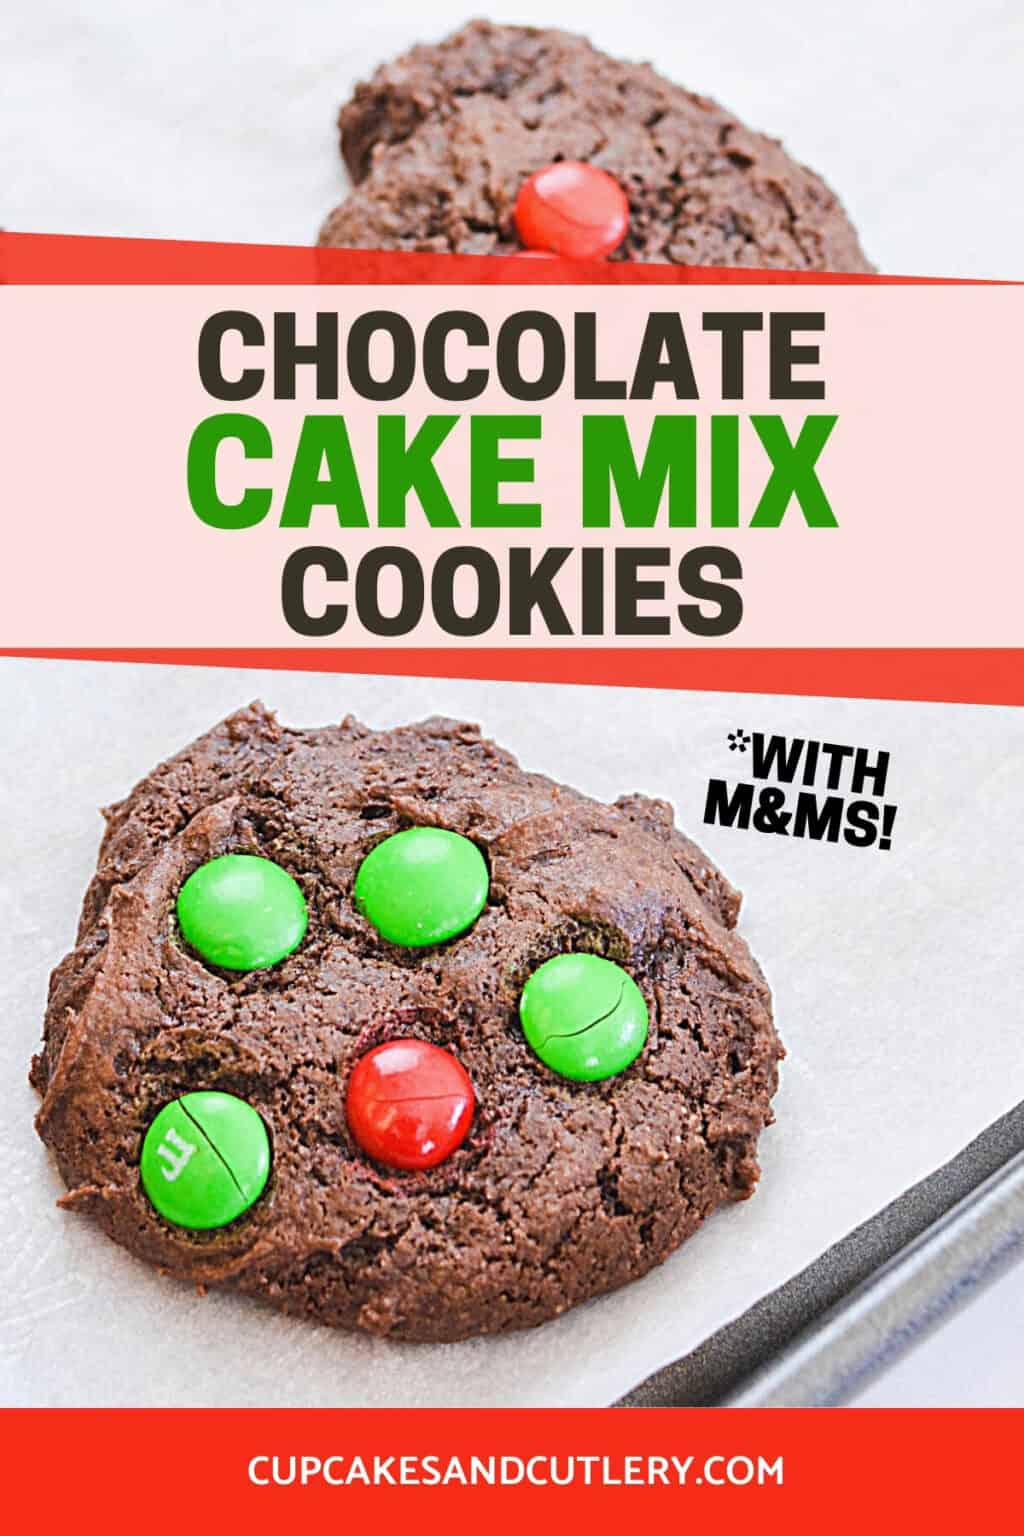 Holiday Chocolate Cake Mix Cookies with M&Ms | Cupcakes and Cutlery